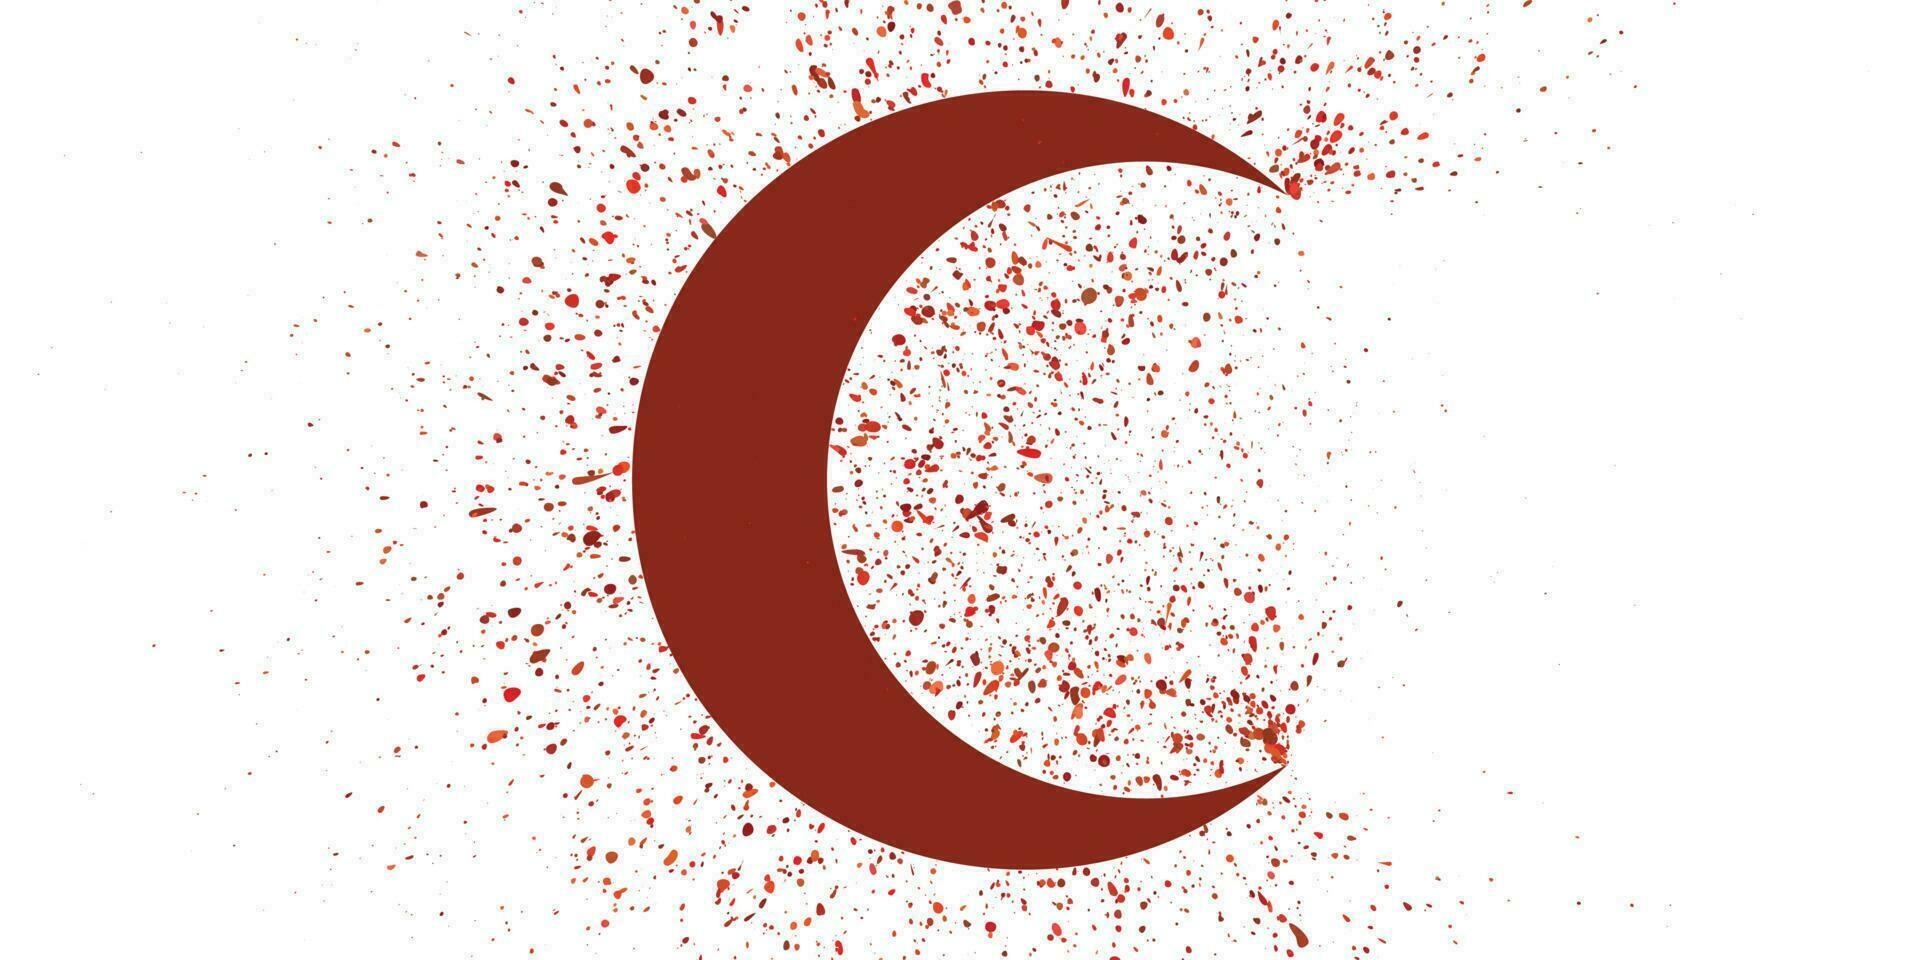 splatter effect of symbol CRESCENT MOON muslim islam sign with red color blood vector